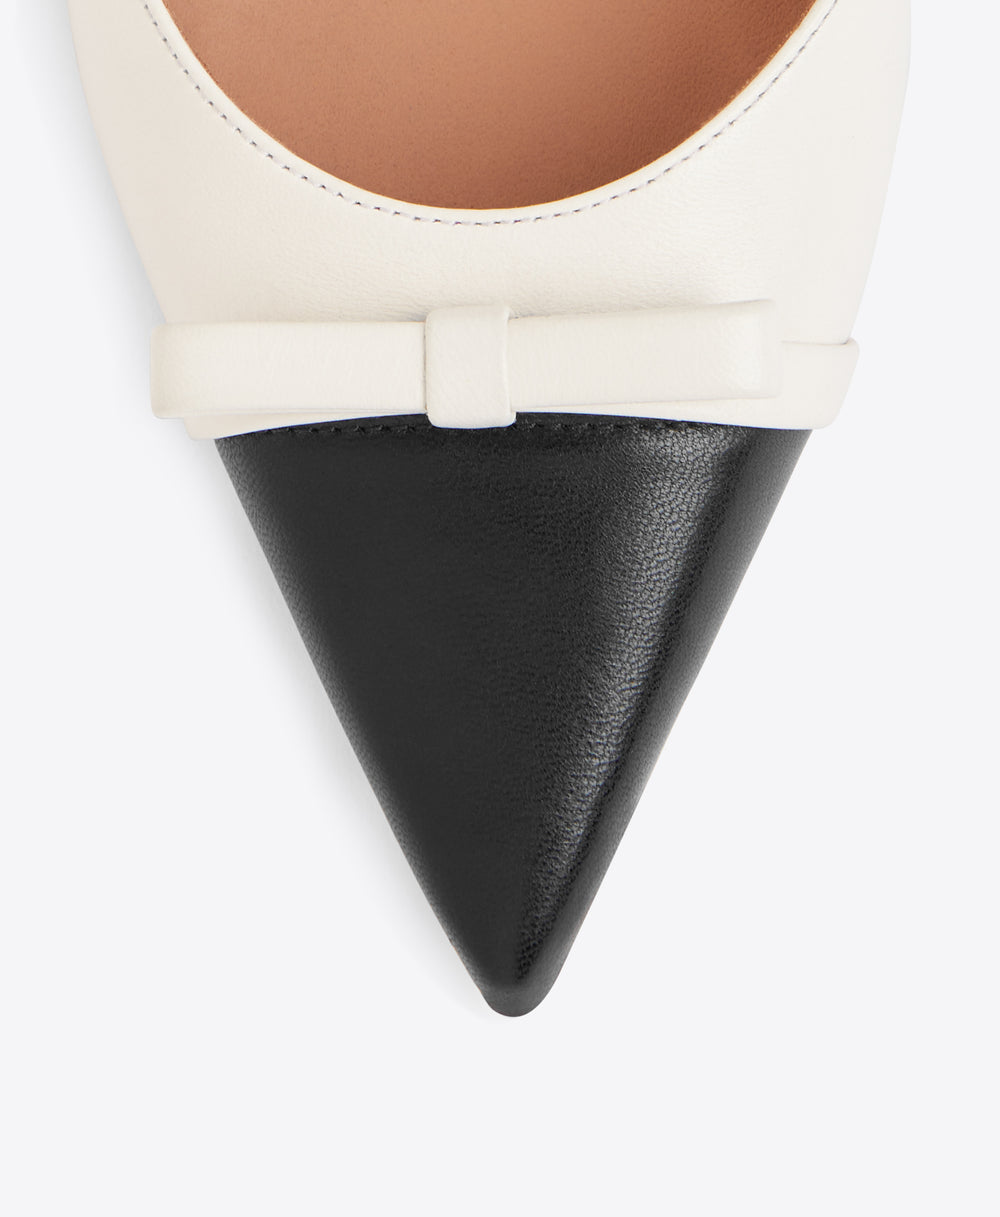 Malone Souliers Blythe 80 Black and White Leather Mules